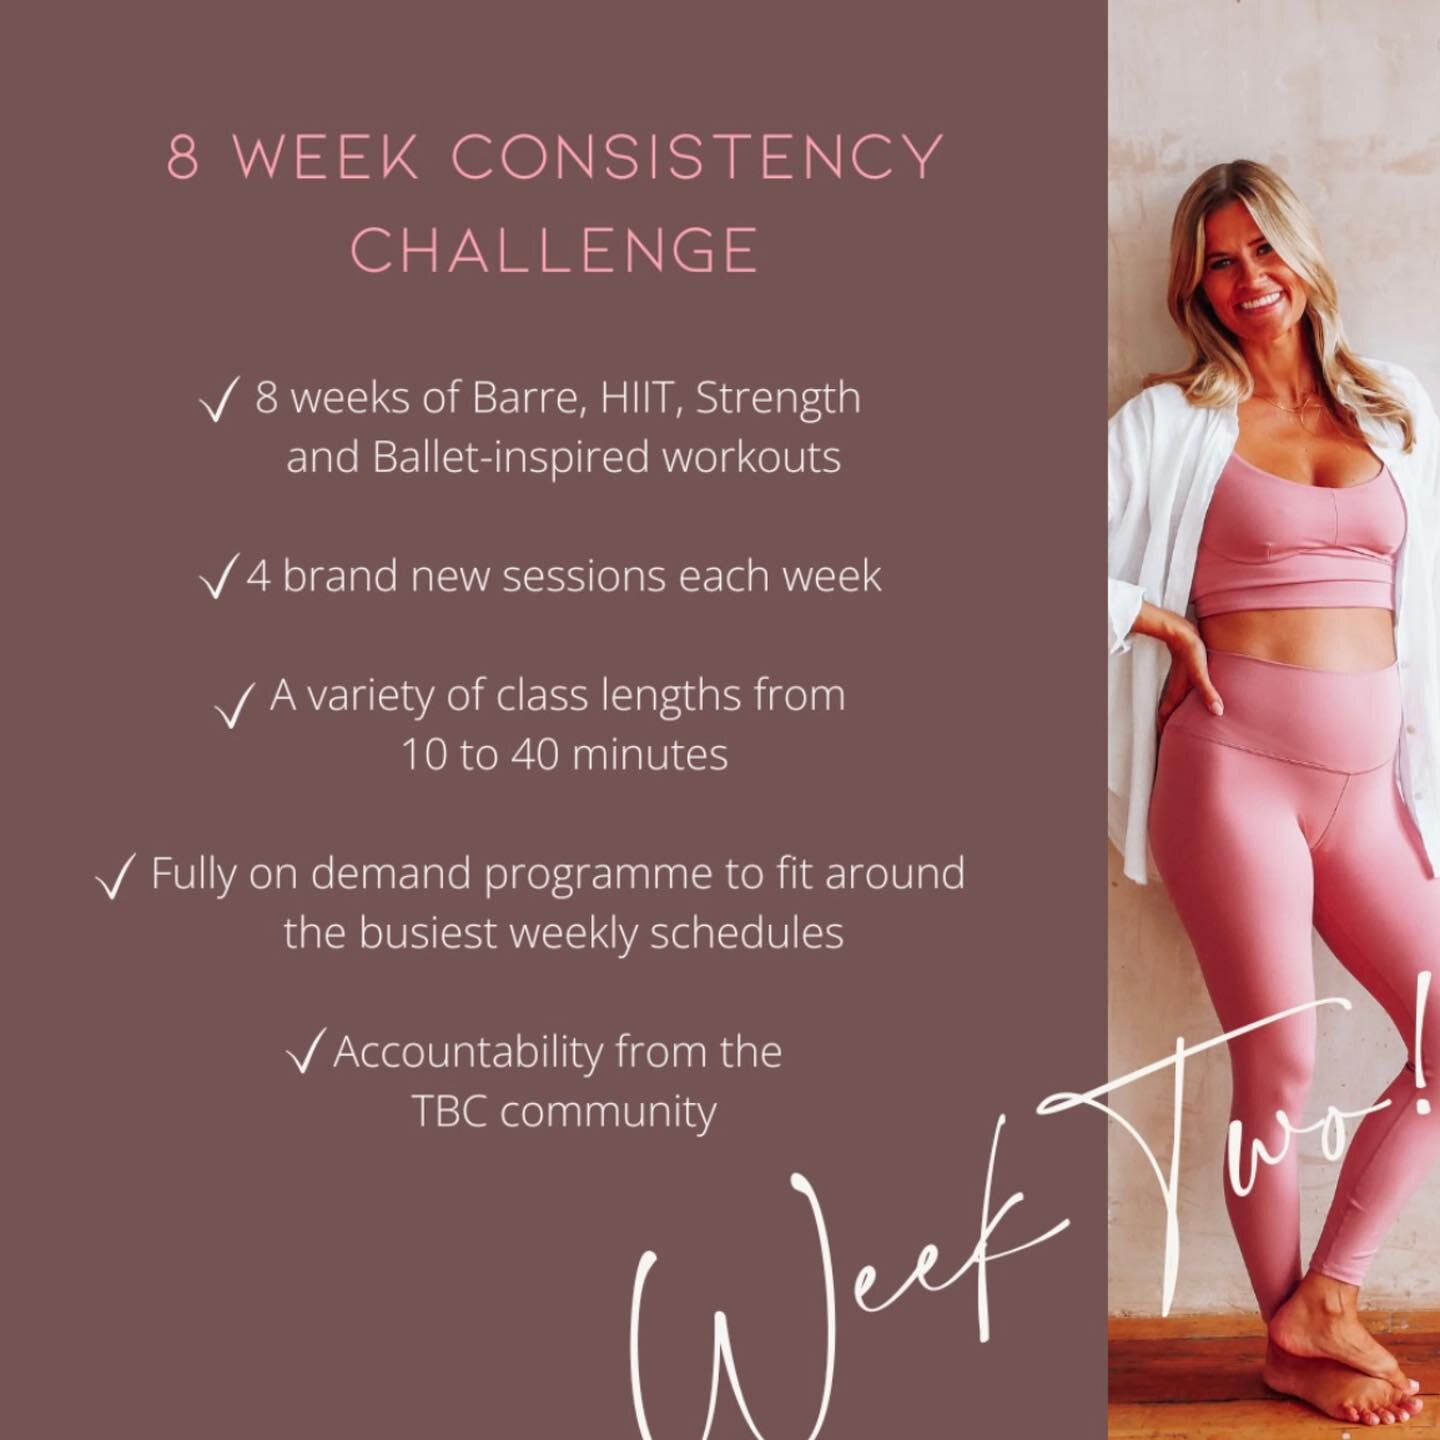 This week, inside The Barre Coach Membership we&rsquo;re heading into week 2 of our 8 week challenge with 4 brand new classes.
&nbsp; &nbsp; &nbsp; &nbsp; &nbsp;
This challenge  is all about helping you have your most consistent relationship with exe